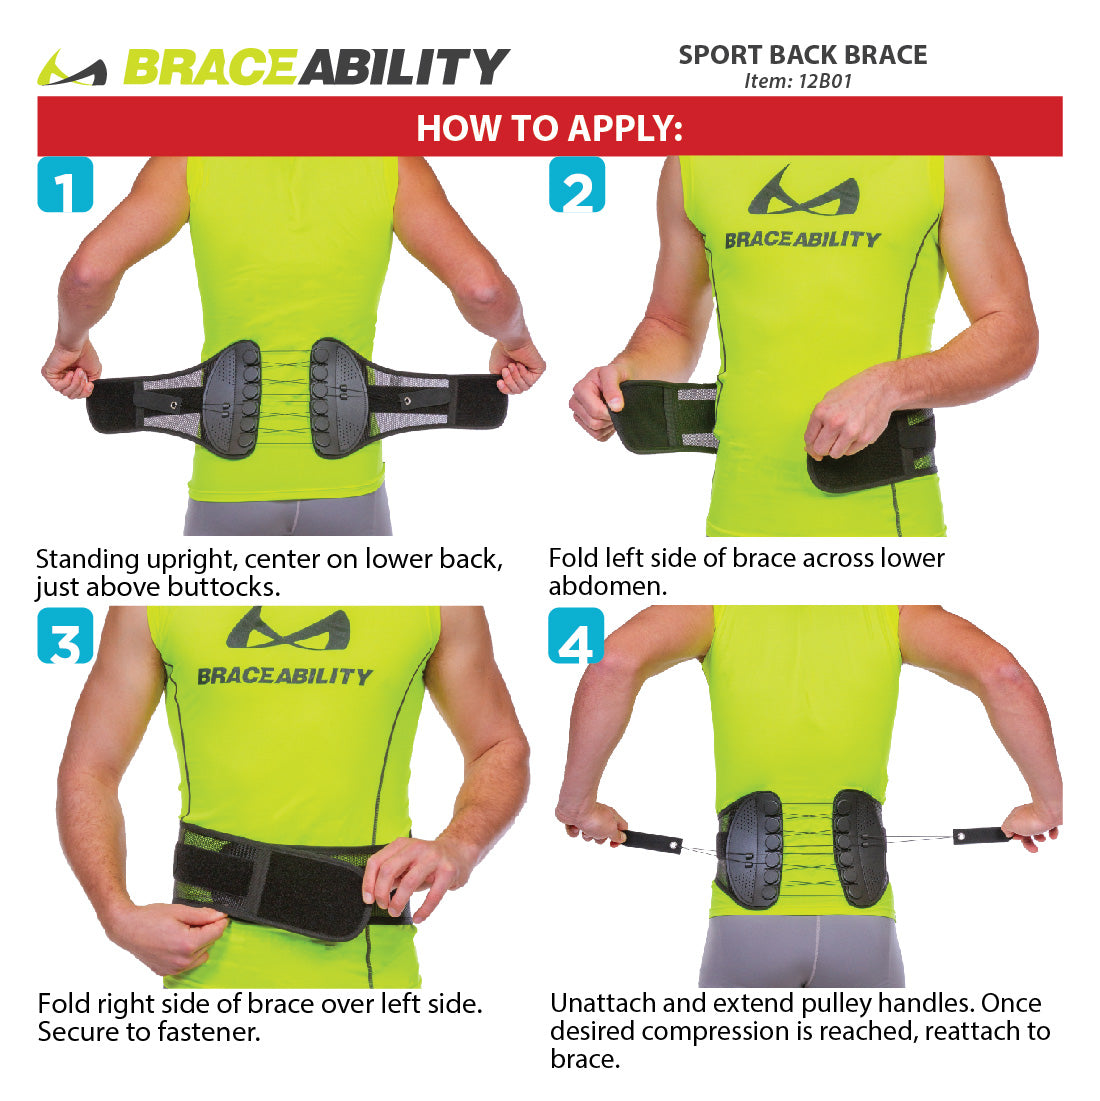 the instruction sheet for the sport back brace is a simple wrap-around style